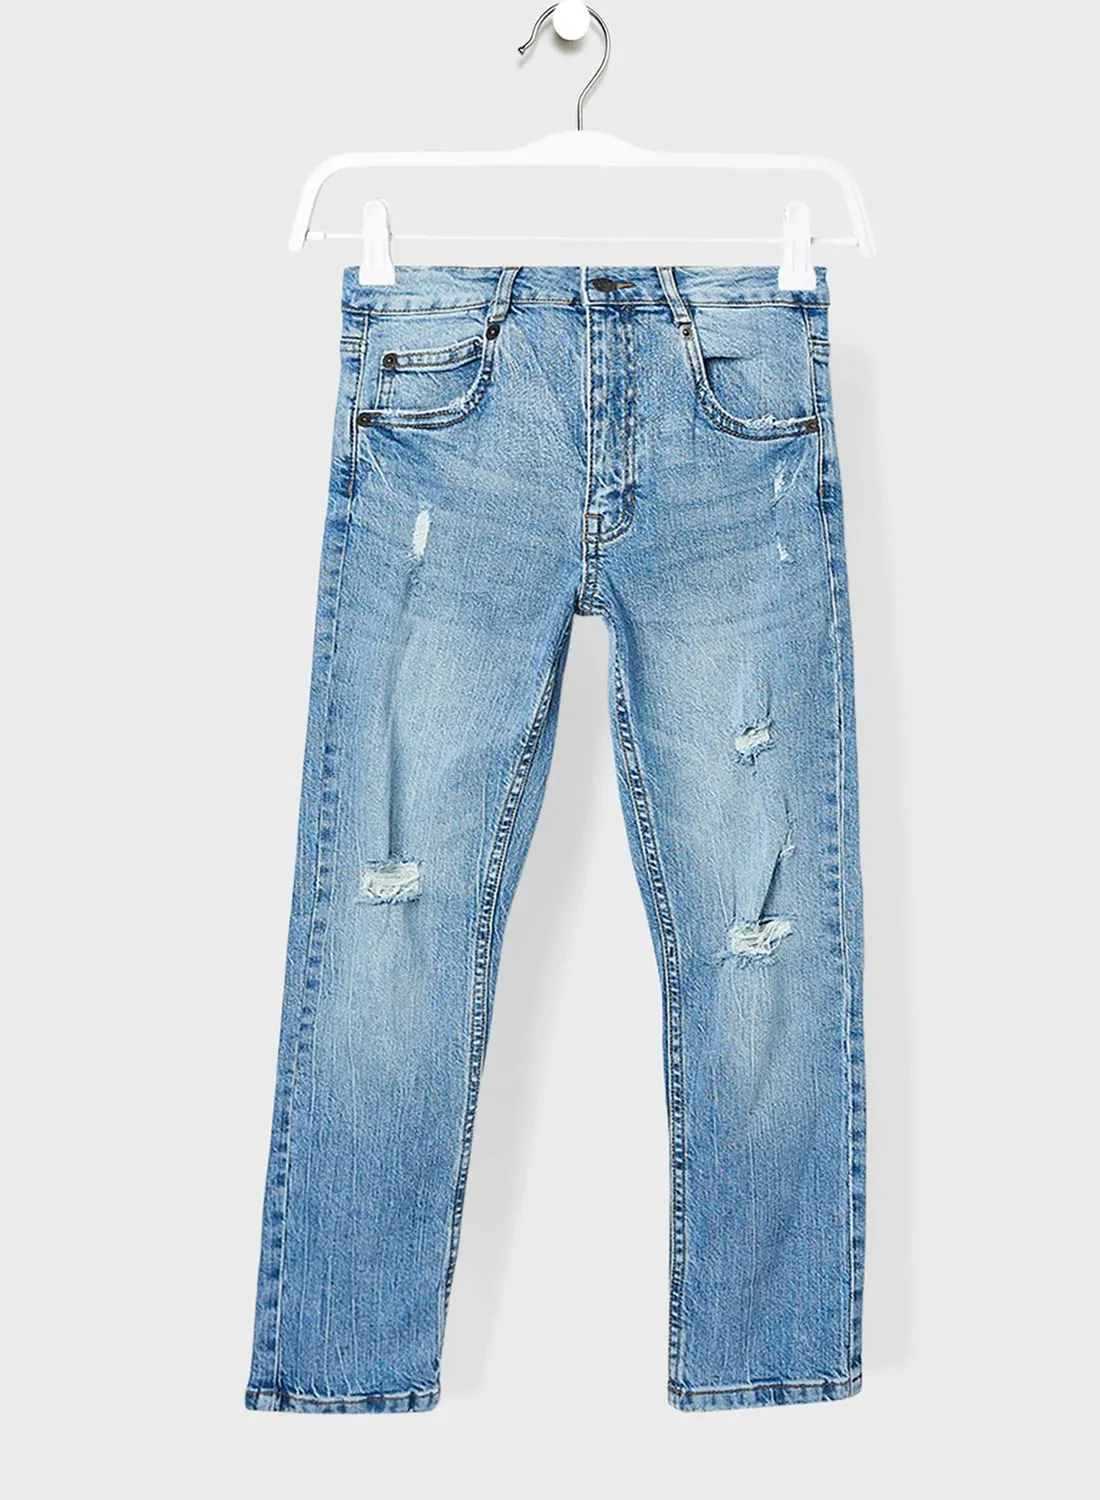 MANGO Youth Distressed Jeans